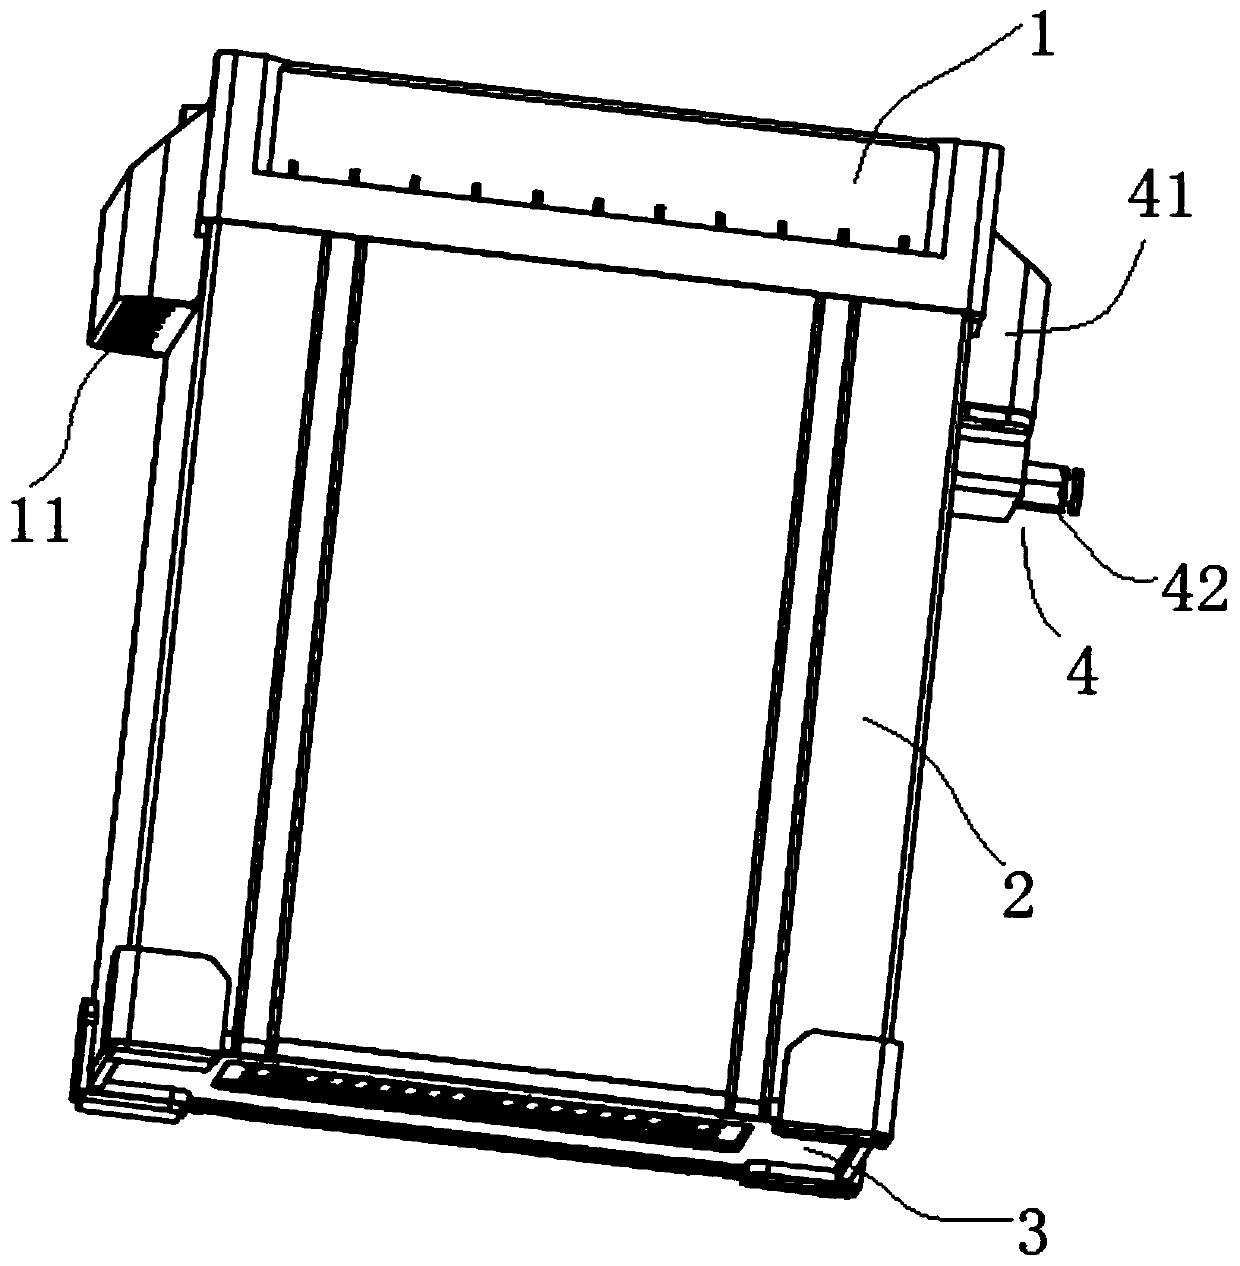 Battery box with heat dissipation structure